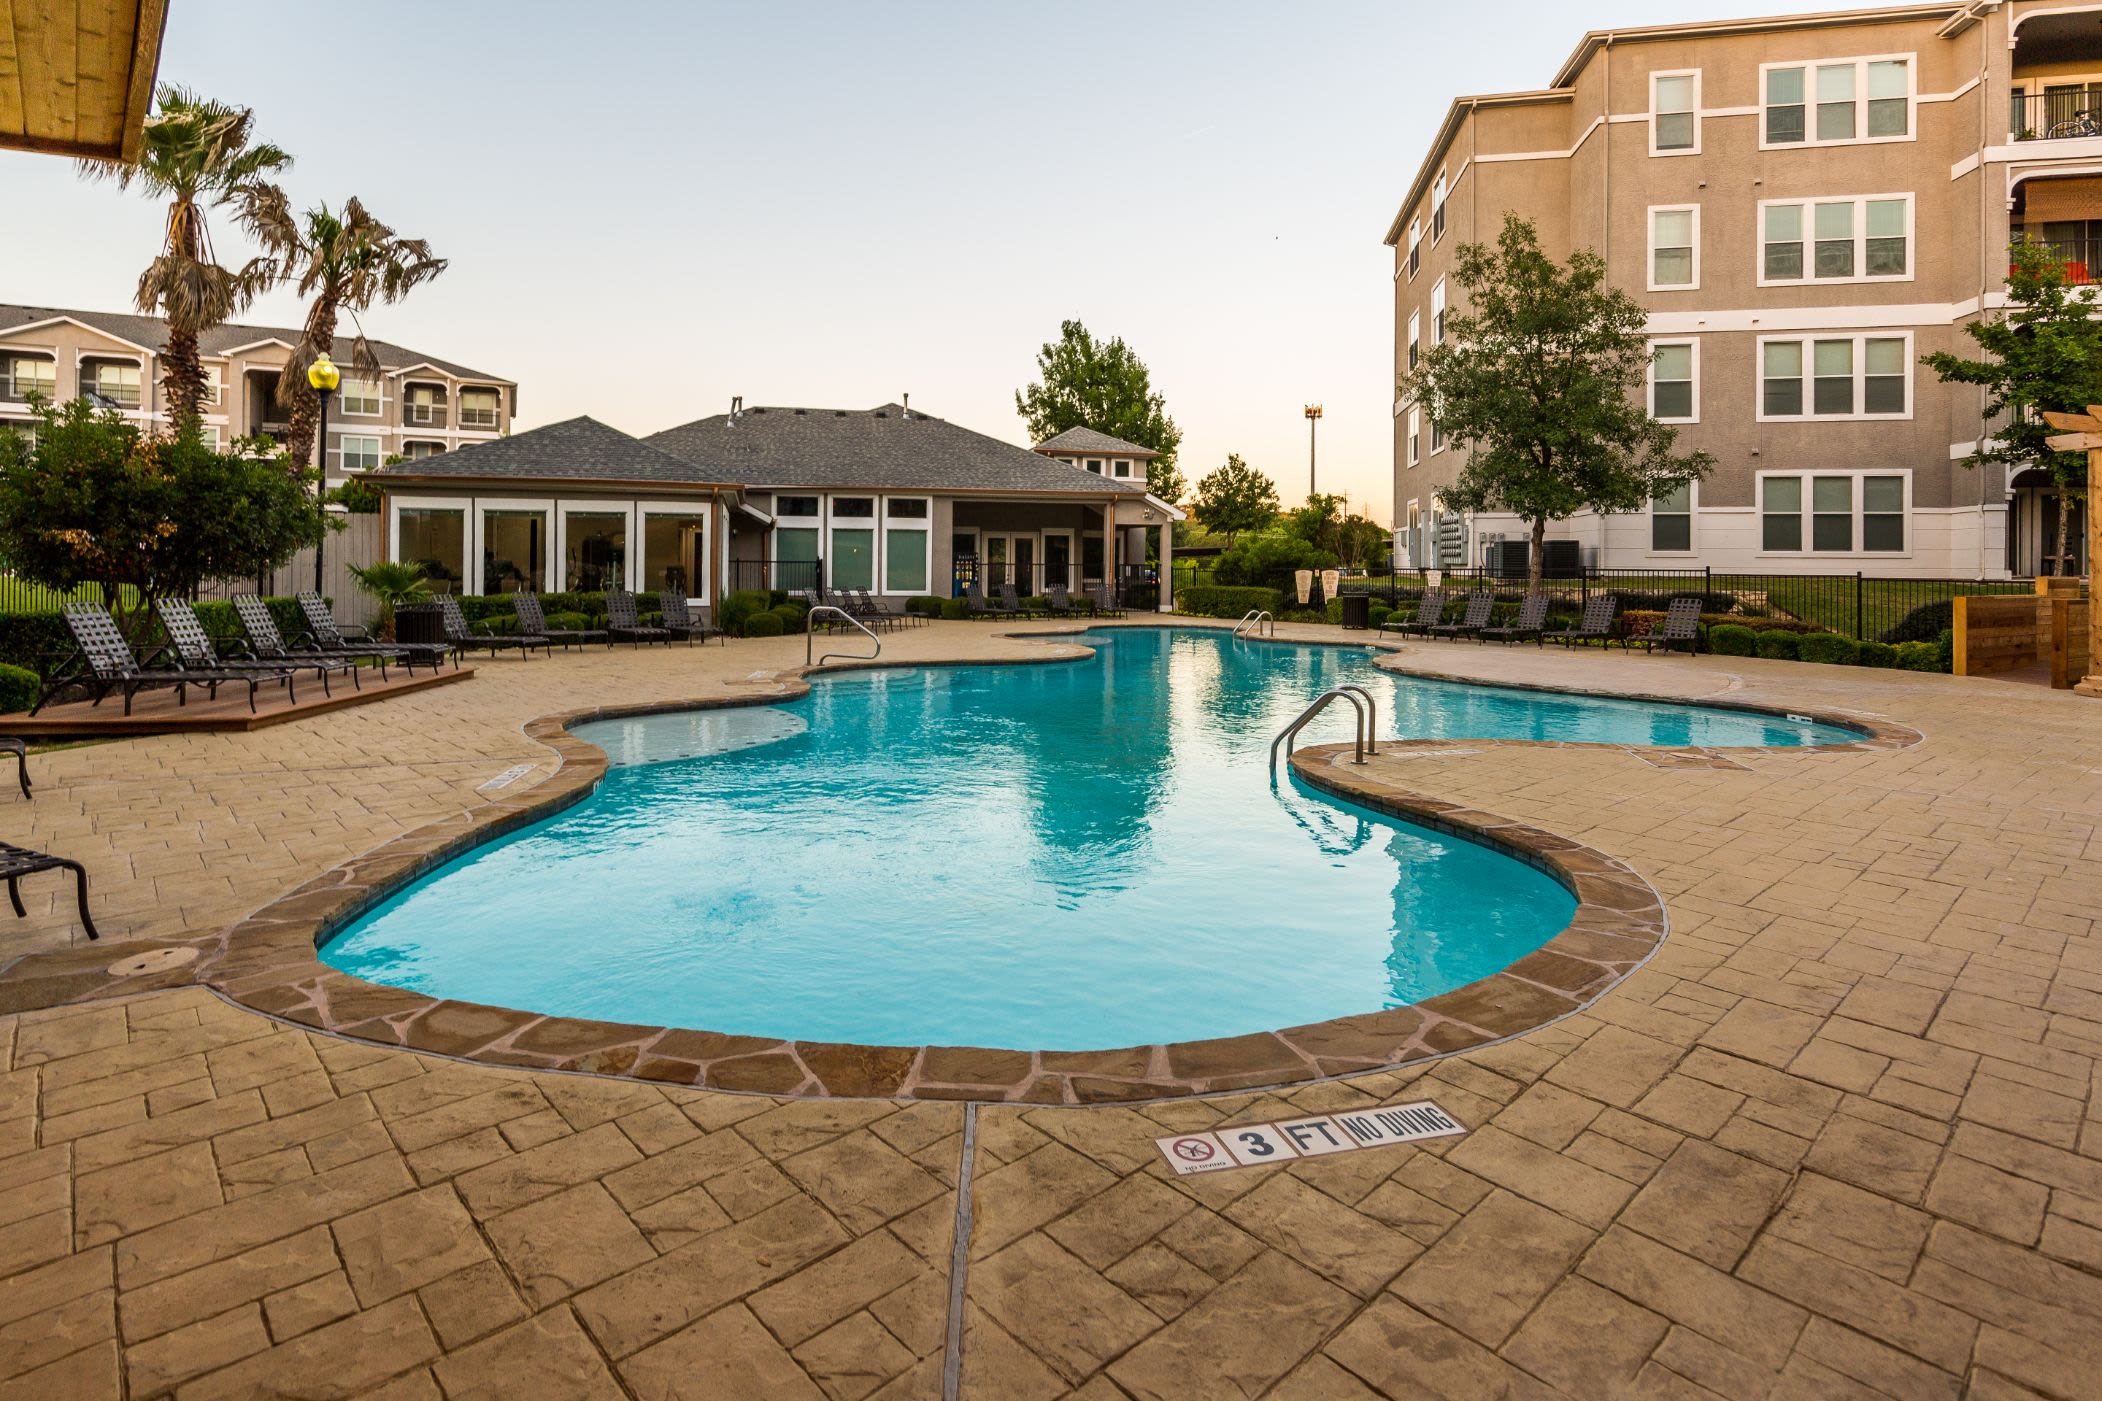 Swimming pool outside of the clubhouse at Marquis at Crown Ridge in San Antonio, Texas